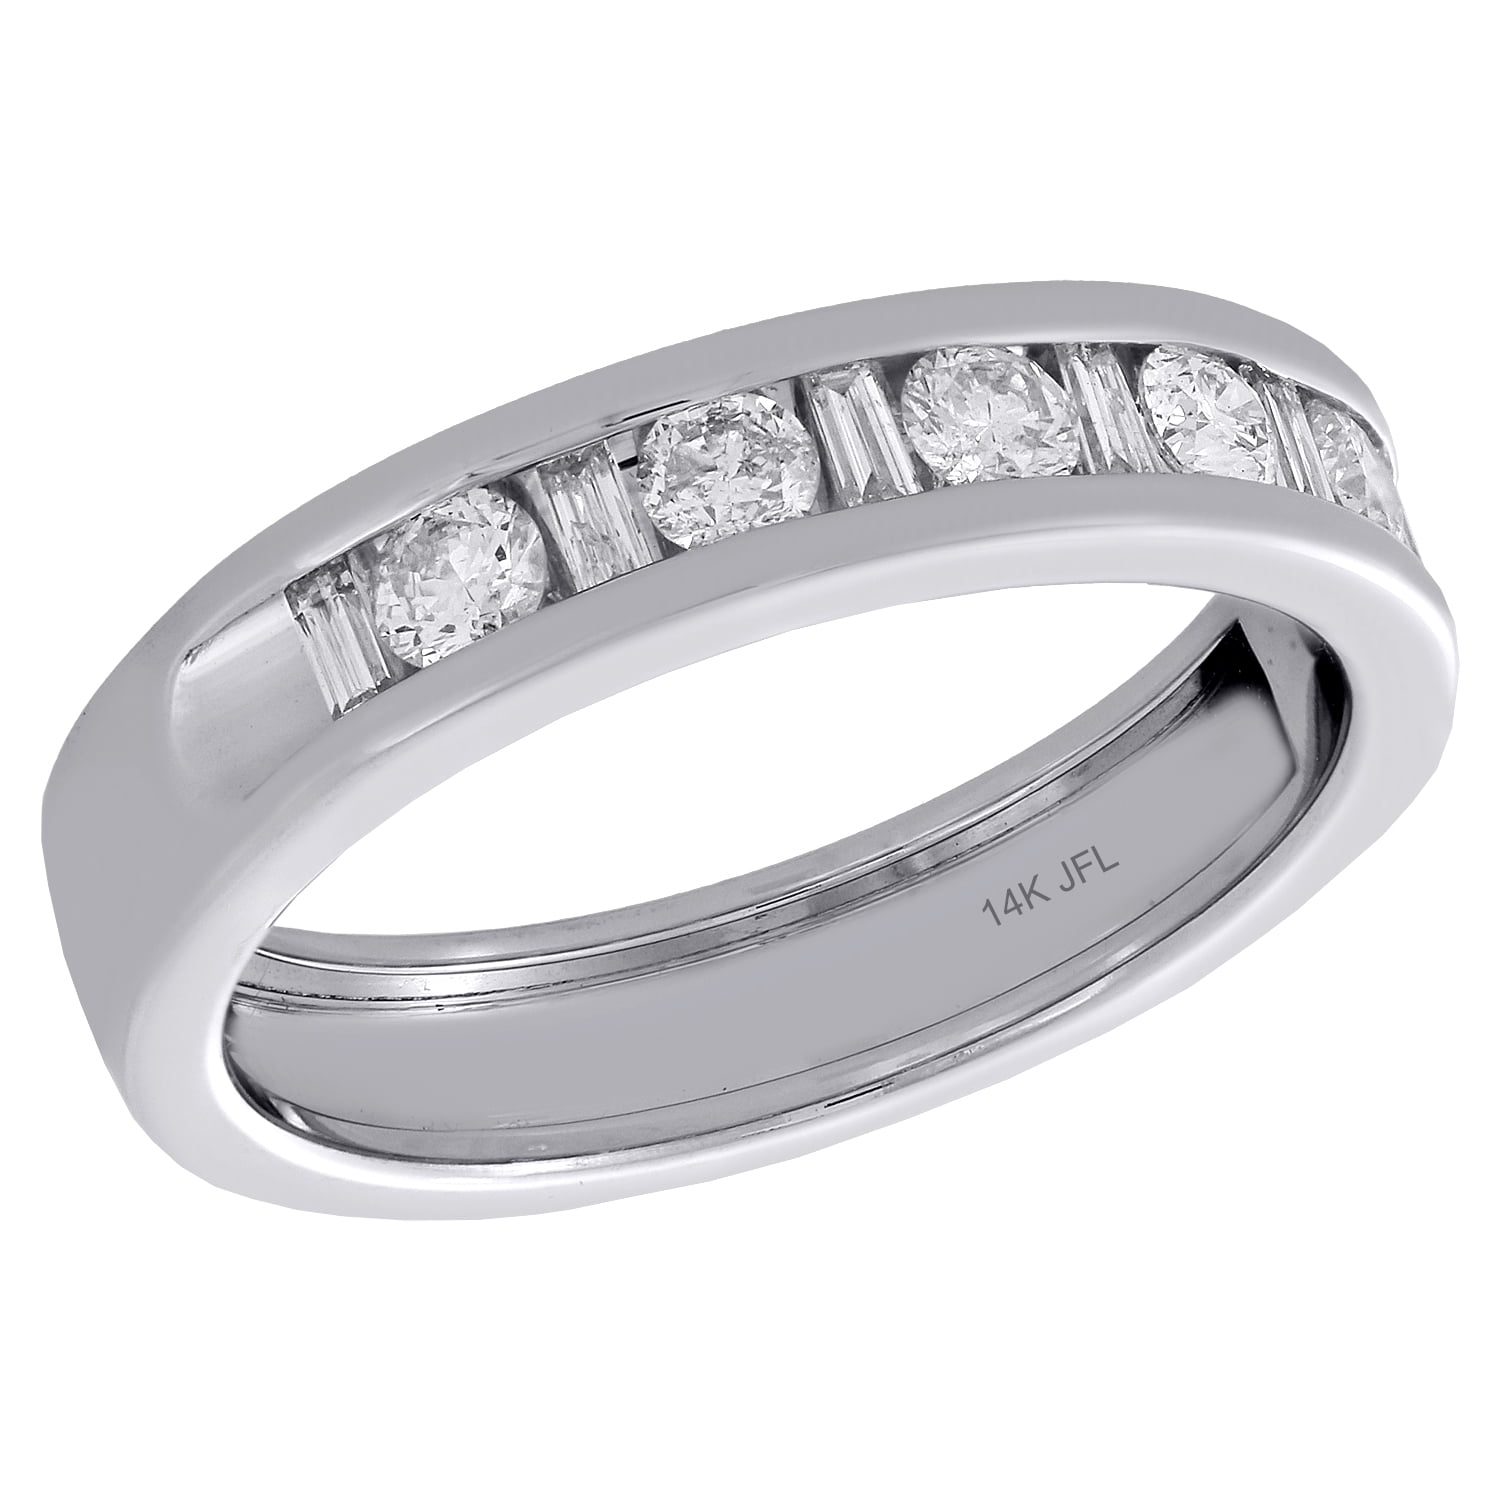 Jewelry For Less - 14K White Gold Baguette & Round Diamond ...